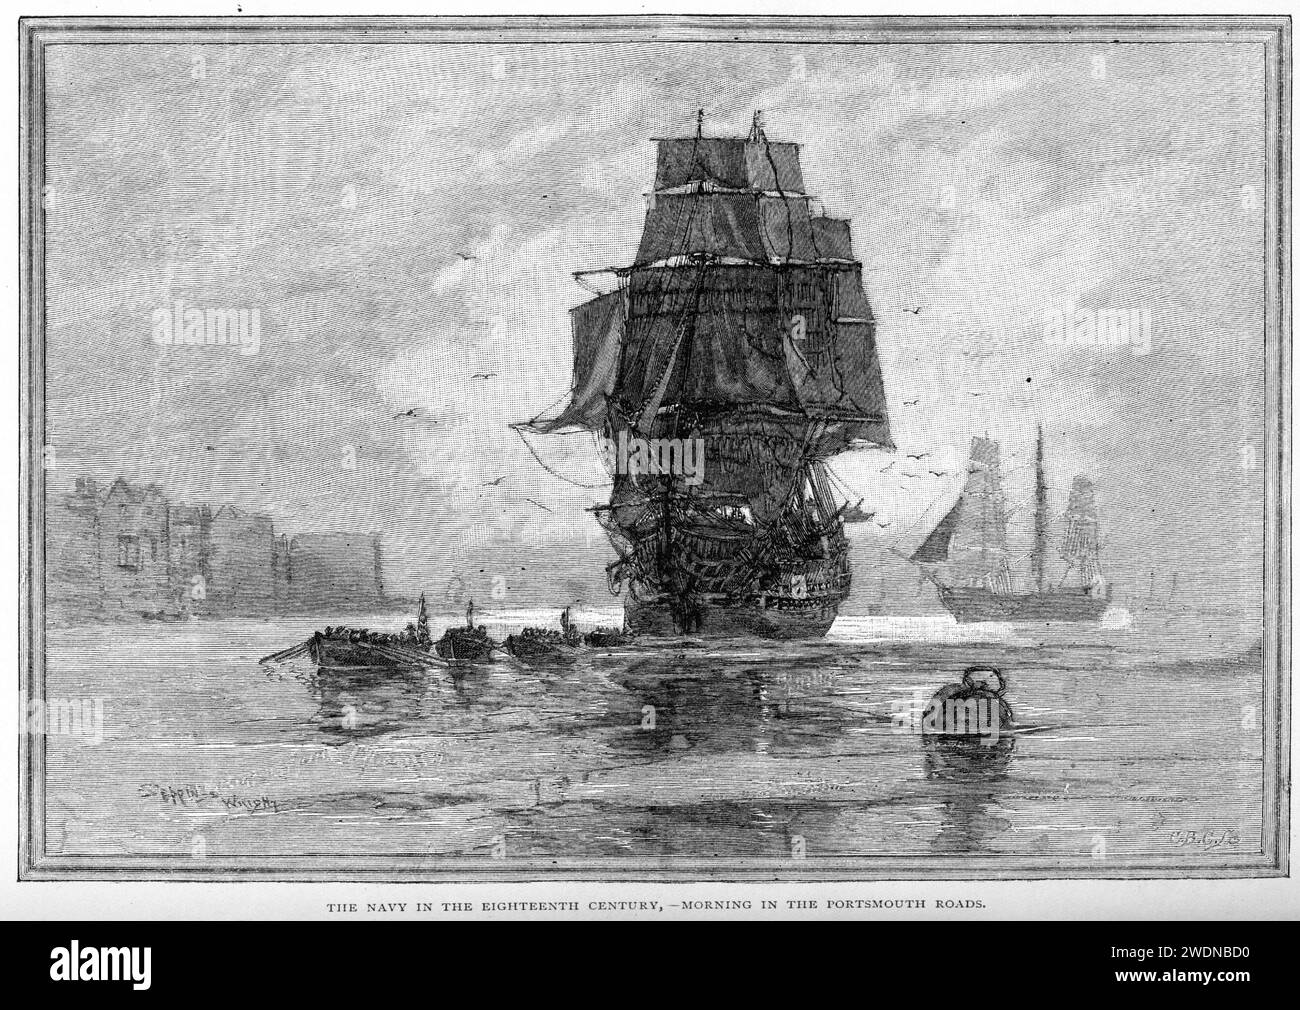 Her Majesty's Navy in the 18th Century - morning in the Portsmouth roads Stock Photo